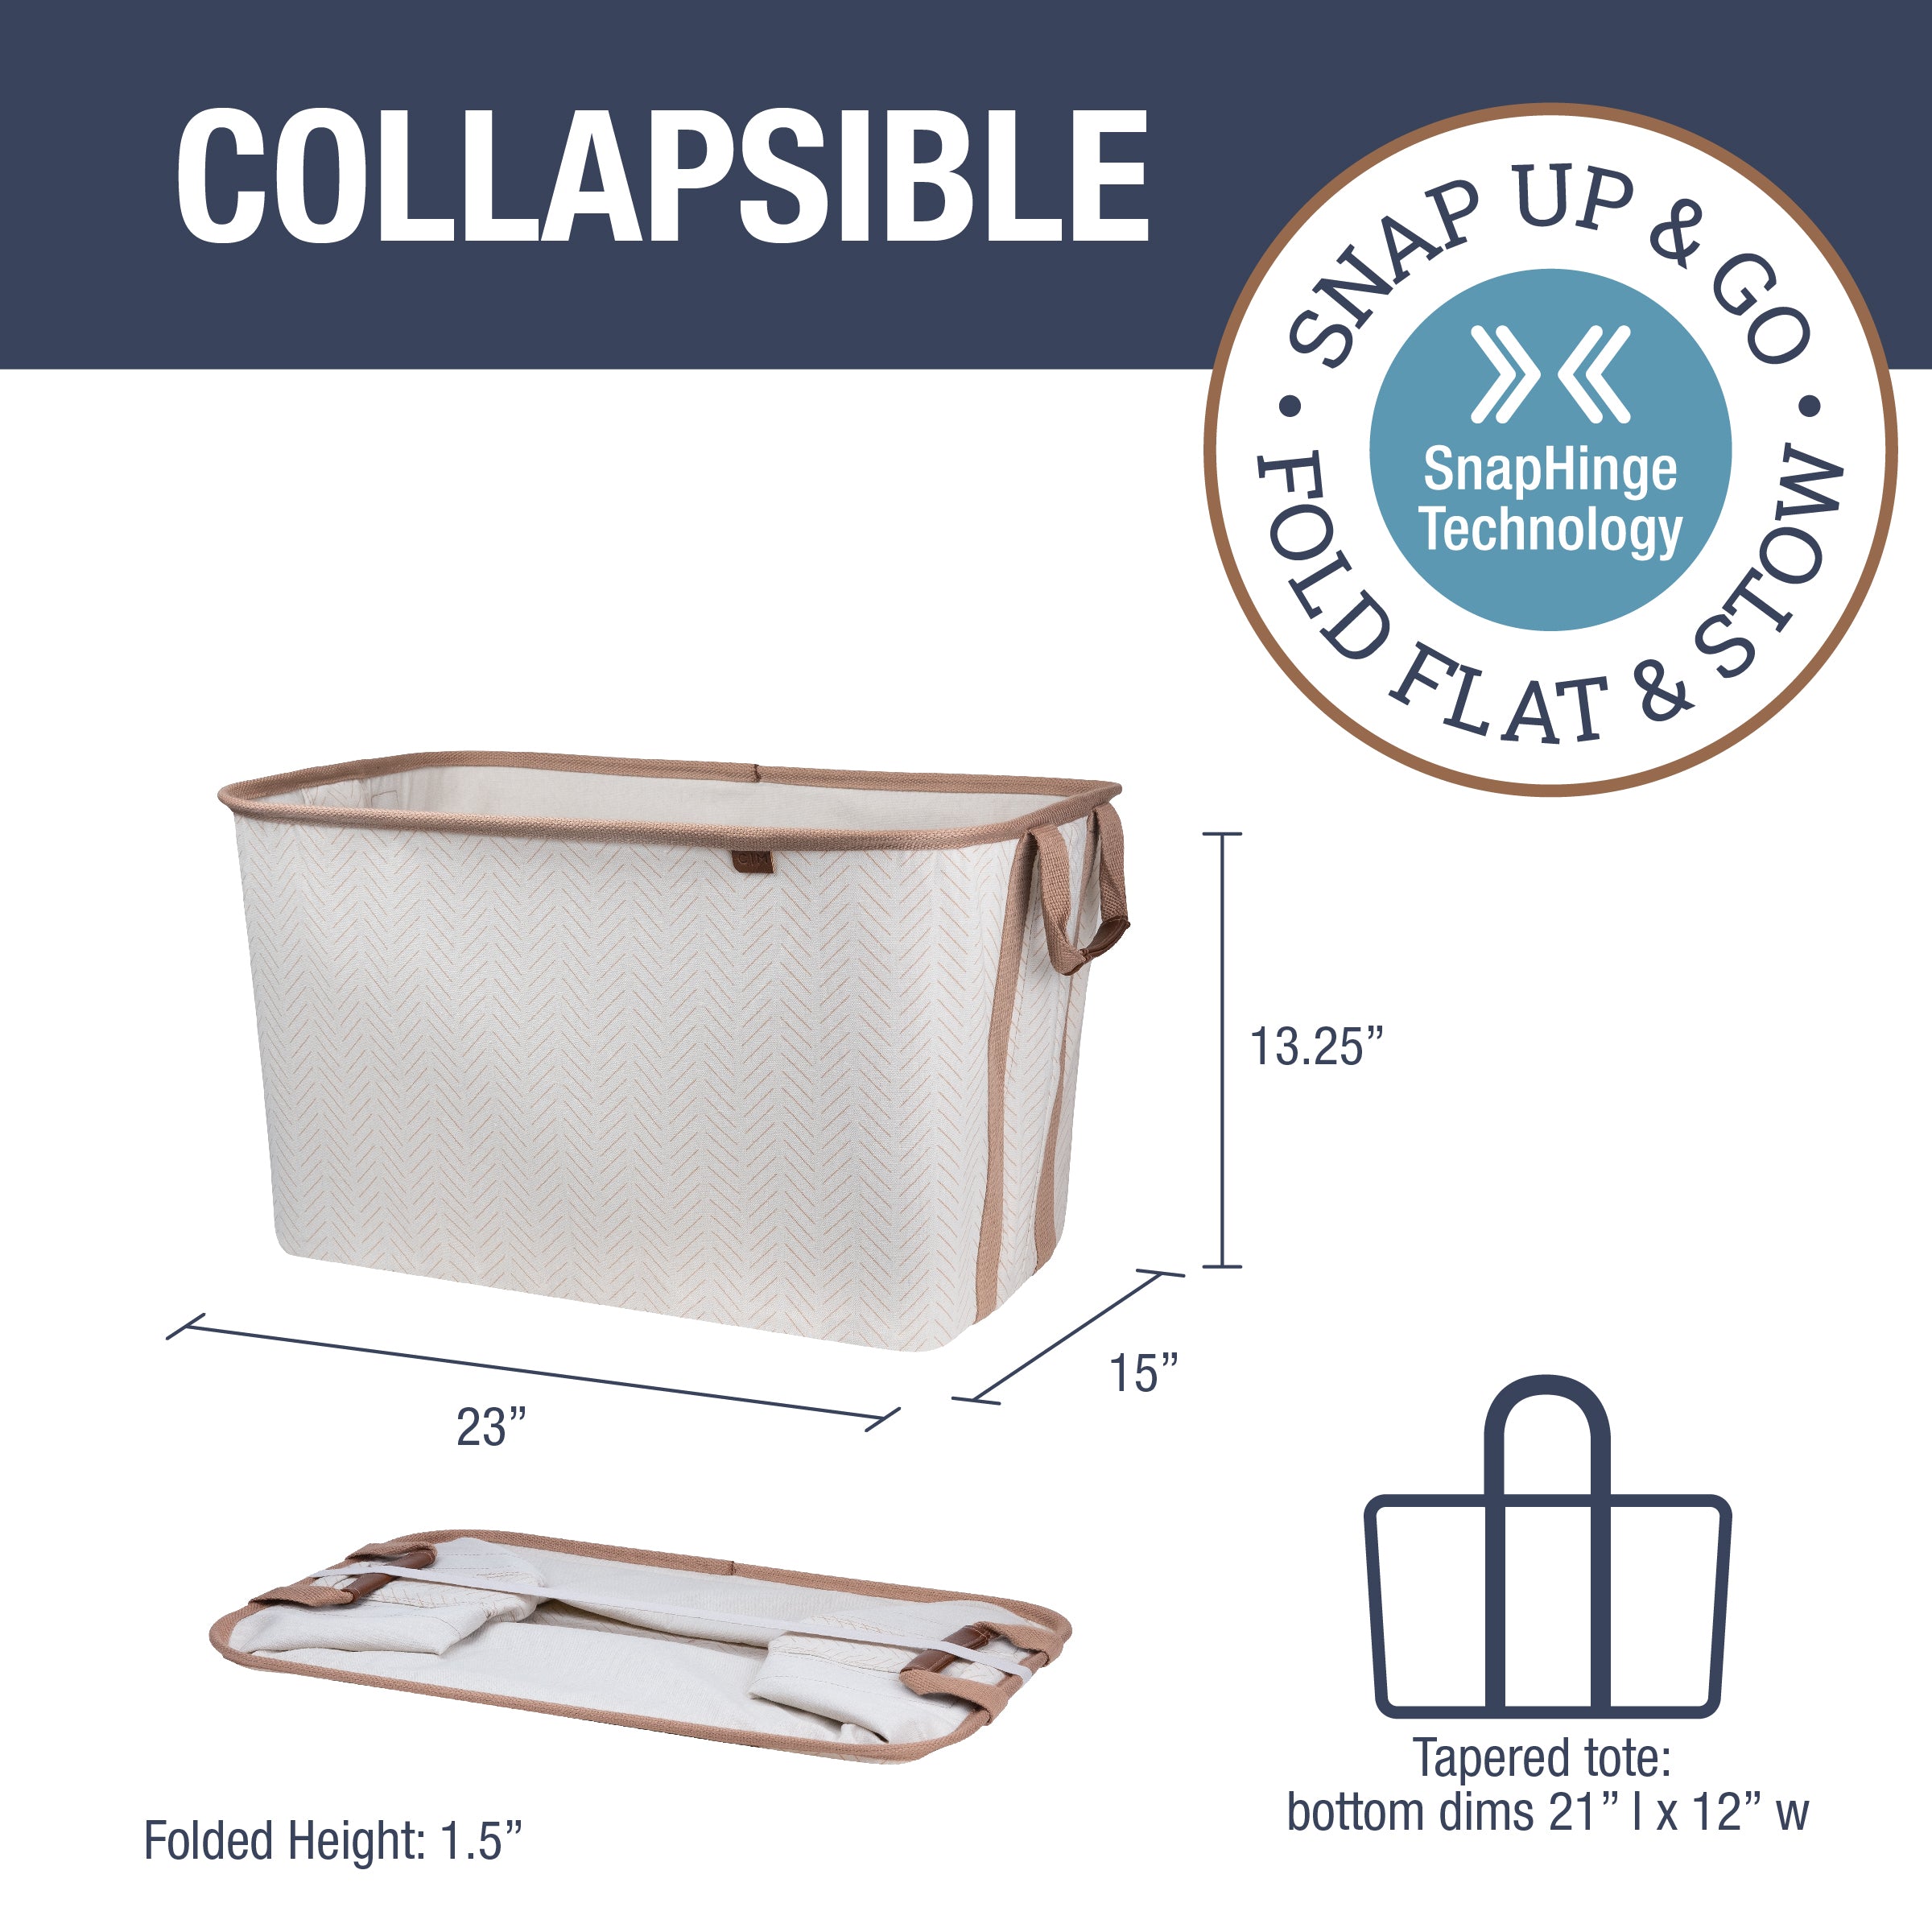 foldable collapsible laundry basket